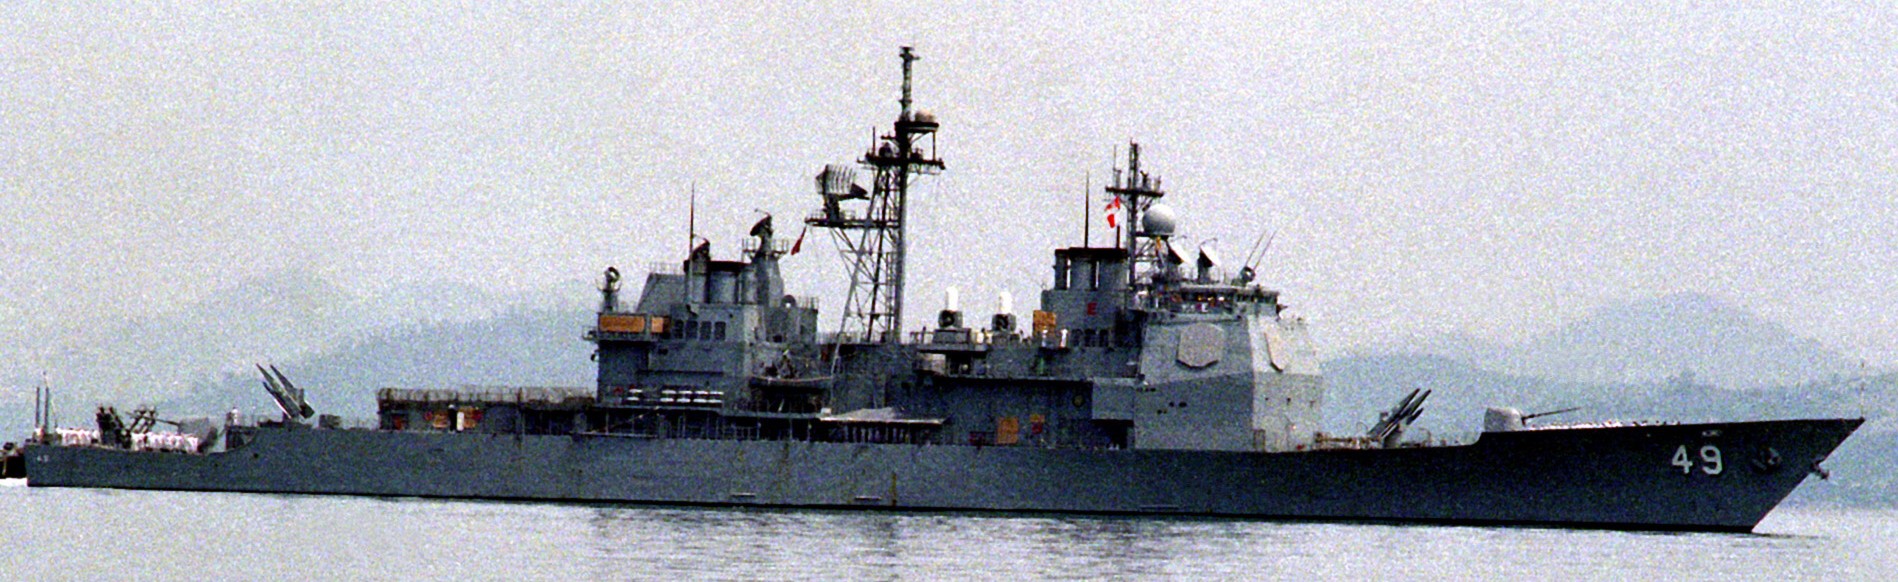 cg-49 uss vincennes ticonderoga class guided missile cruiser aegis us navy subic bay philippines 76